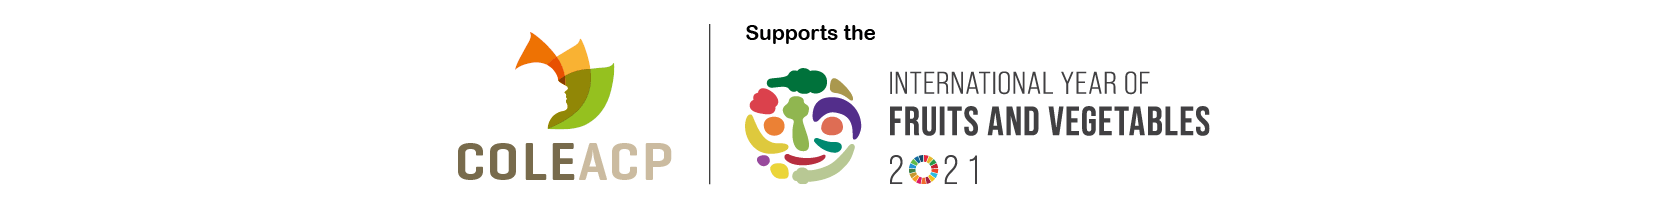 2021- International Year of Fruits and Vegetables